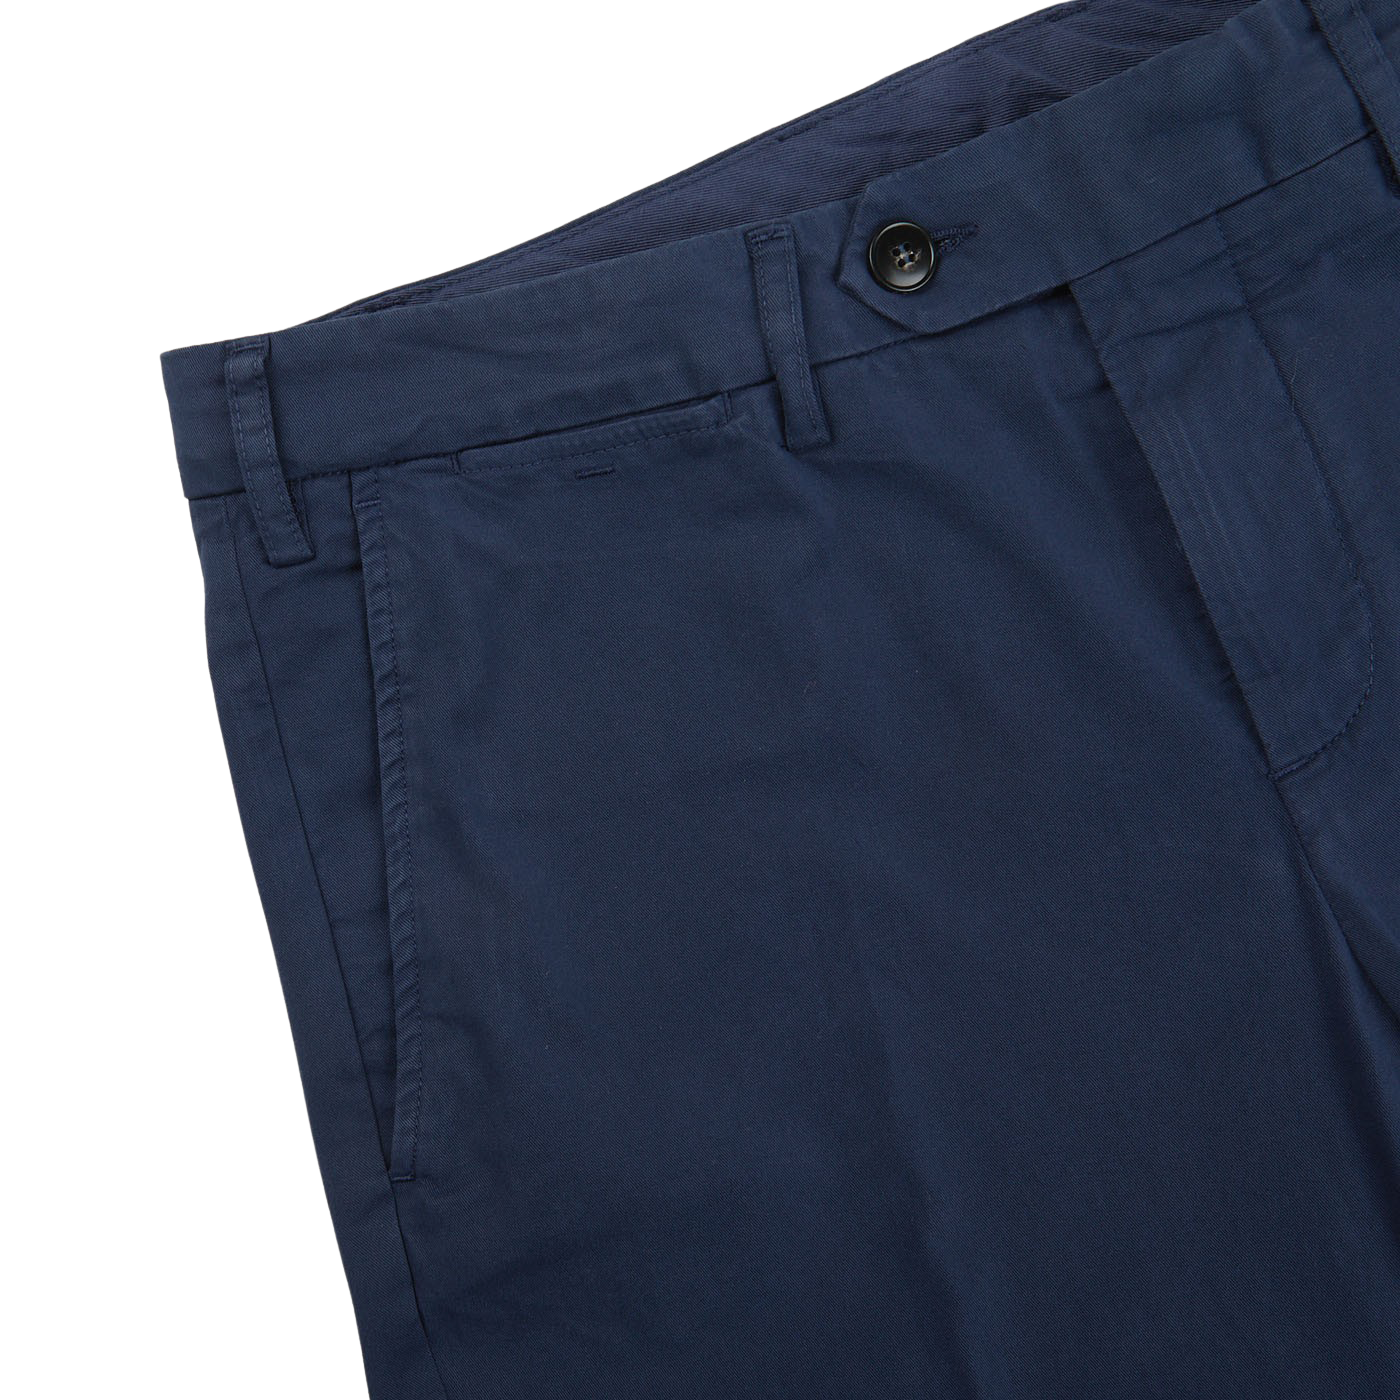 A pair of Canali men's Navy Blue Cotton Stretch Flat Front Chinos.